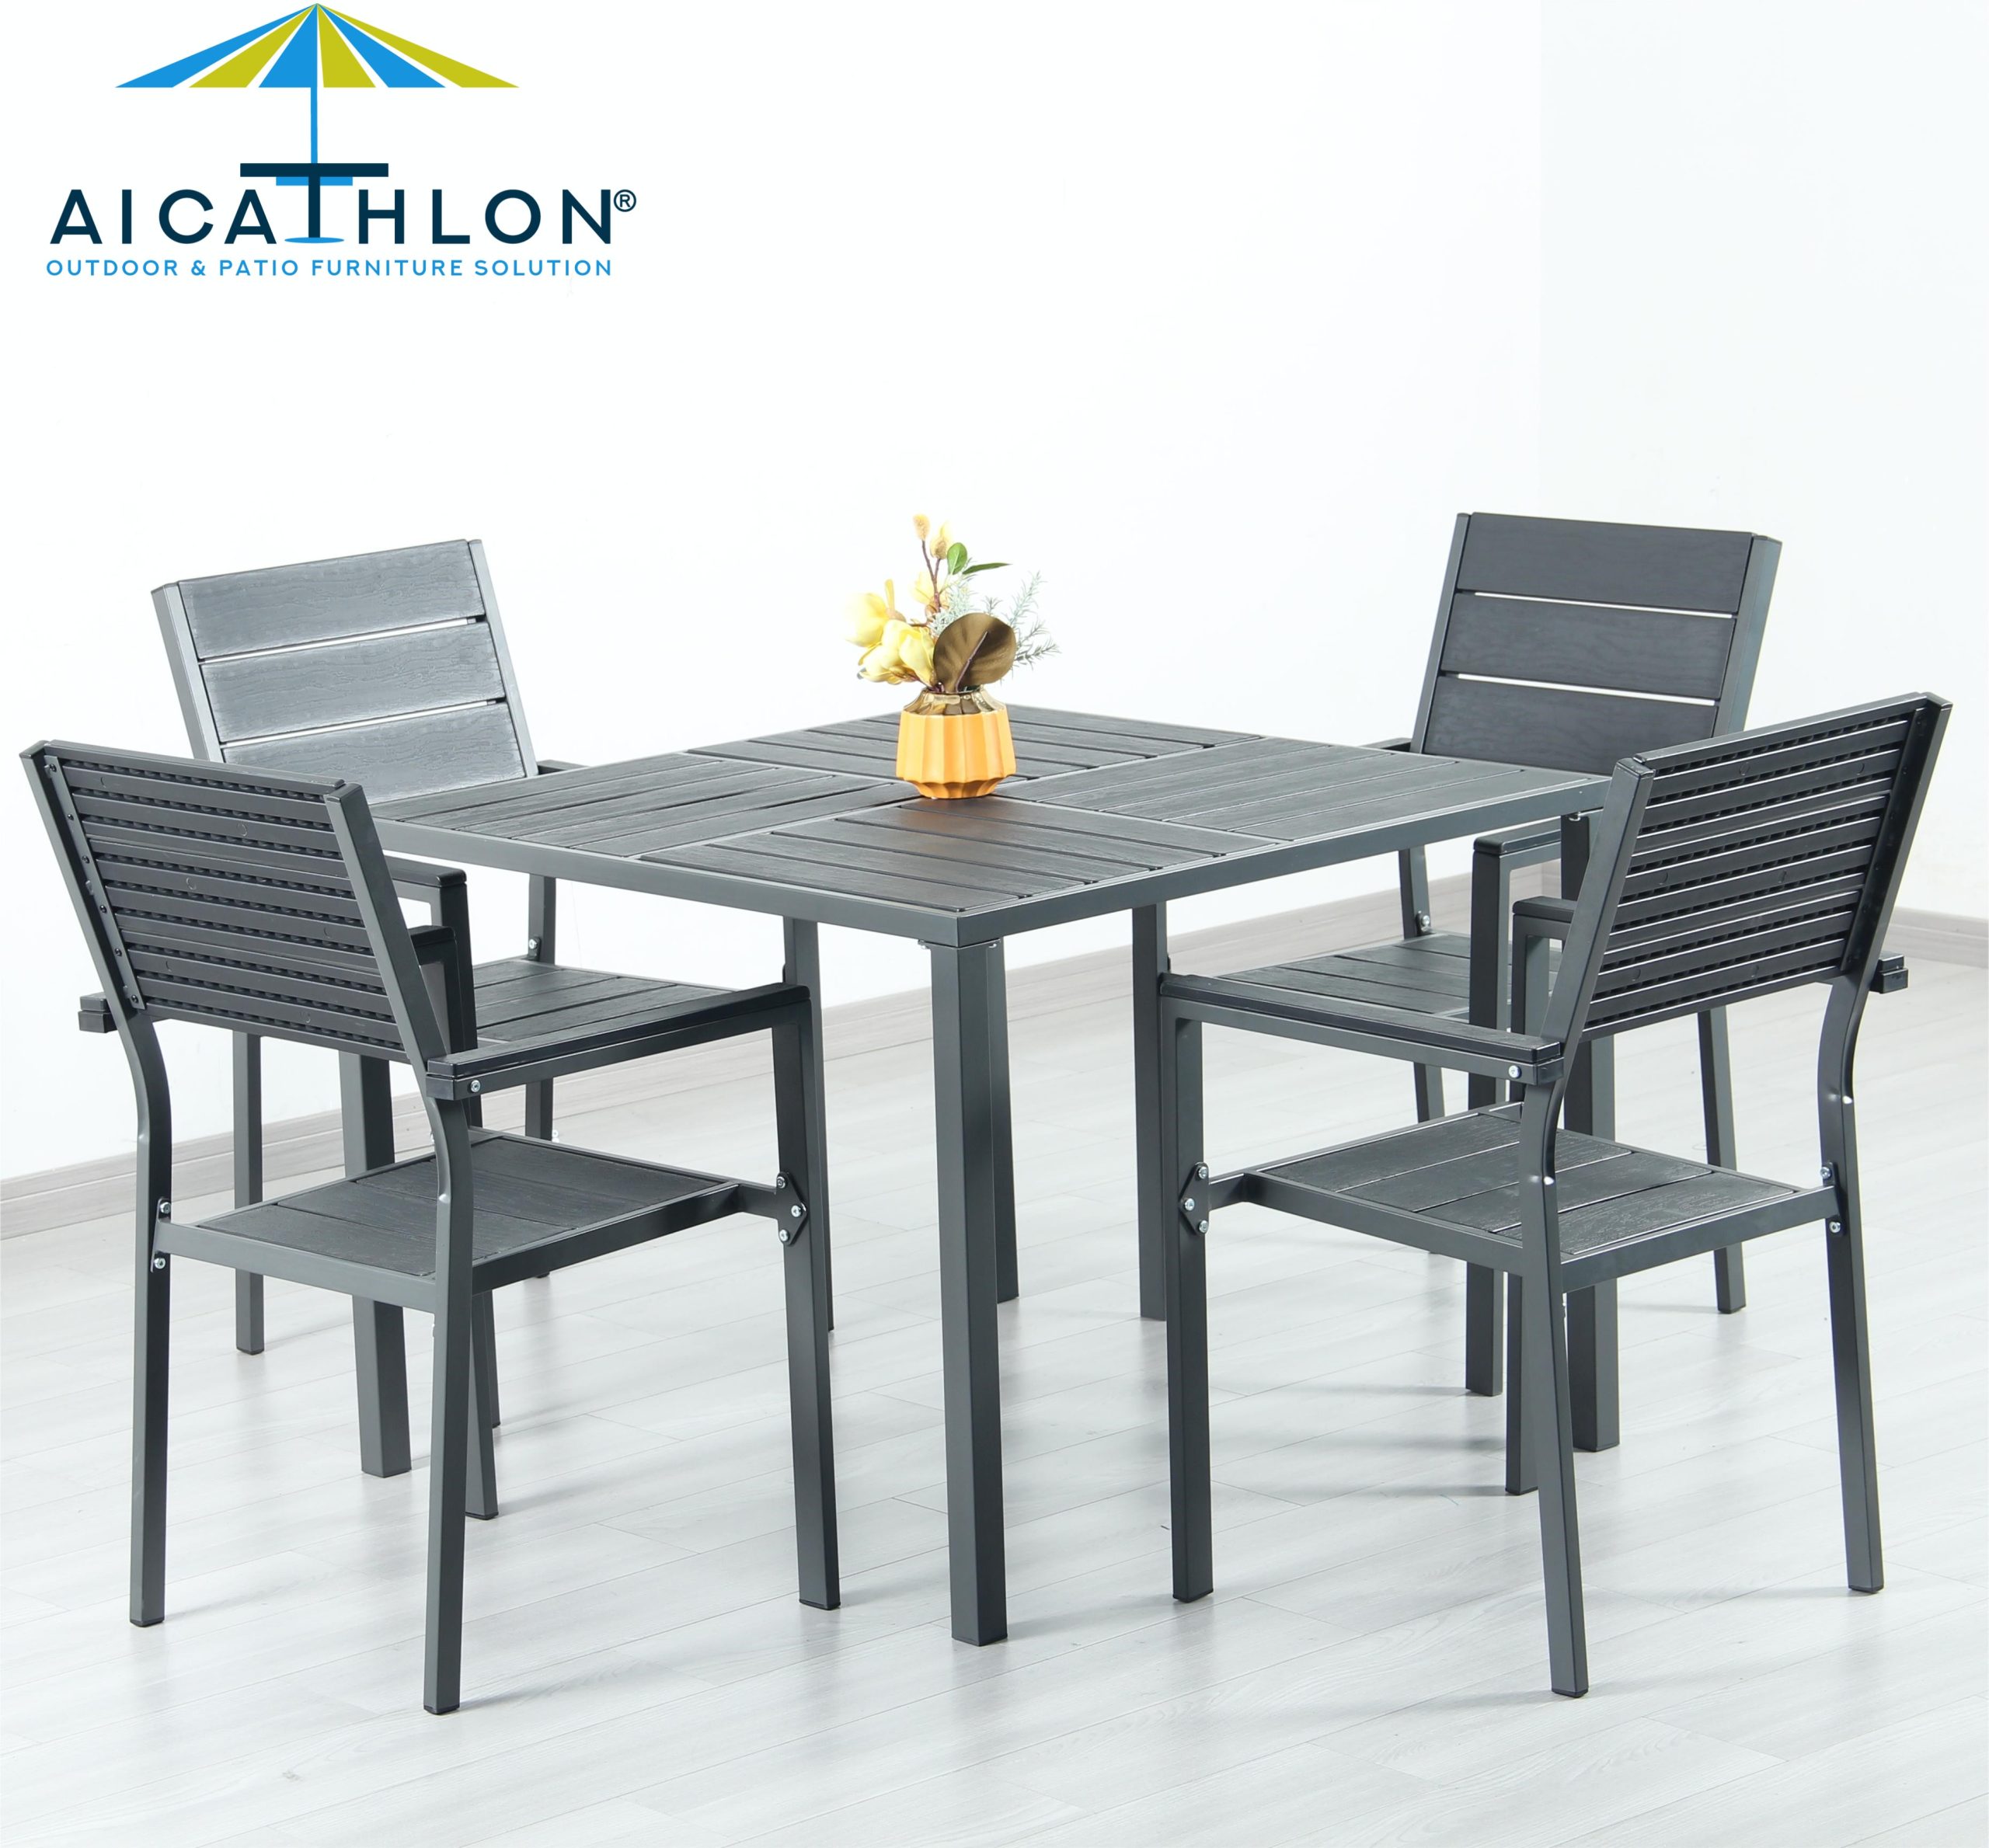 Top selling products outdoor furniture patio black plastic Steel Square dining table and chairs